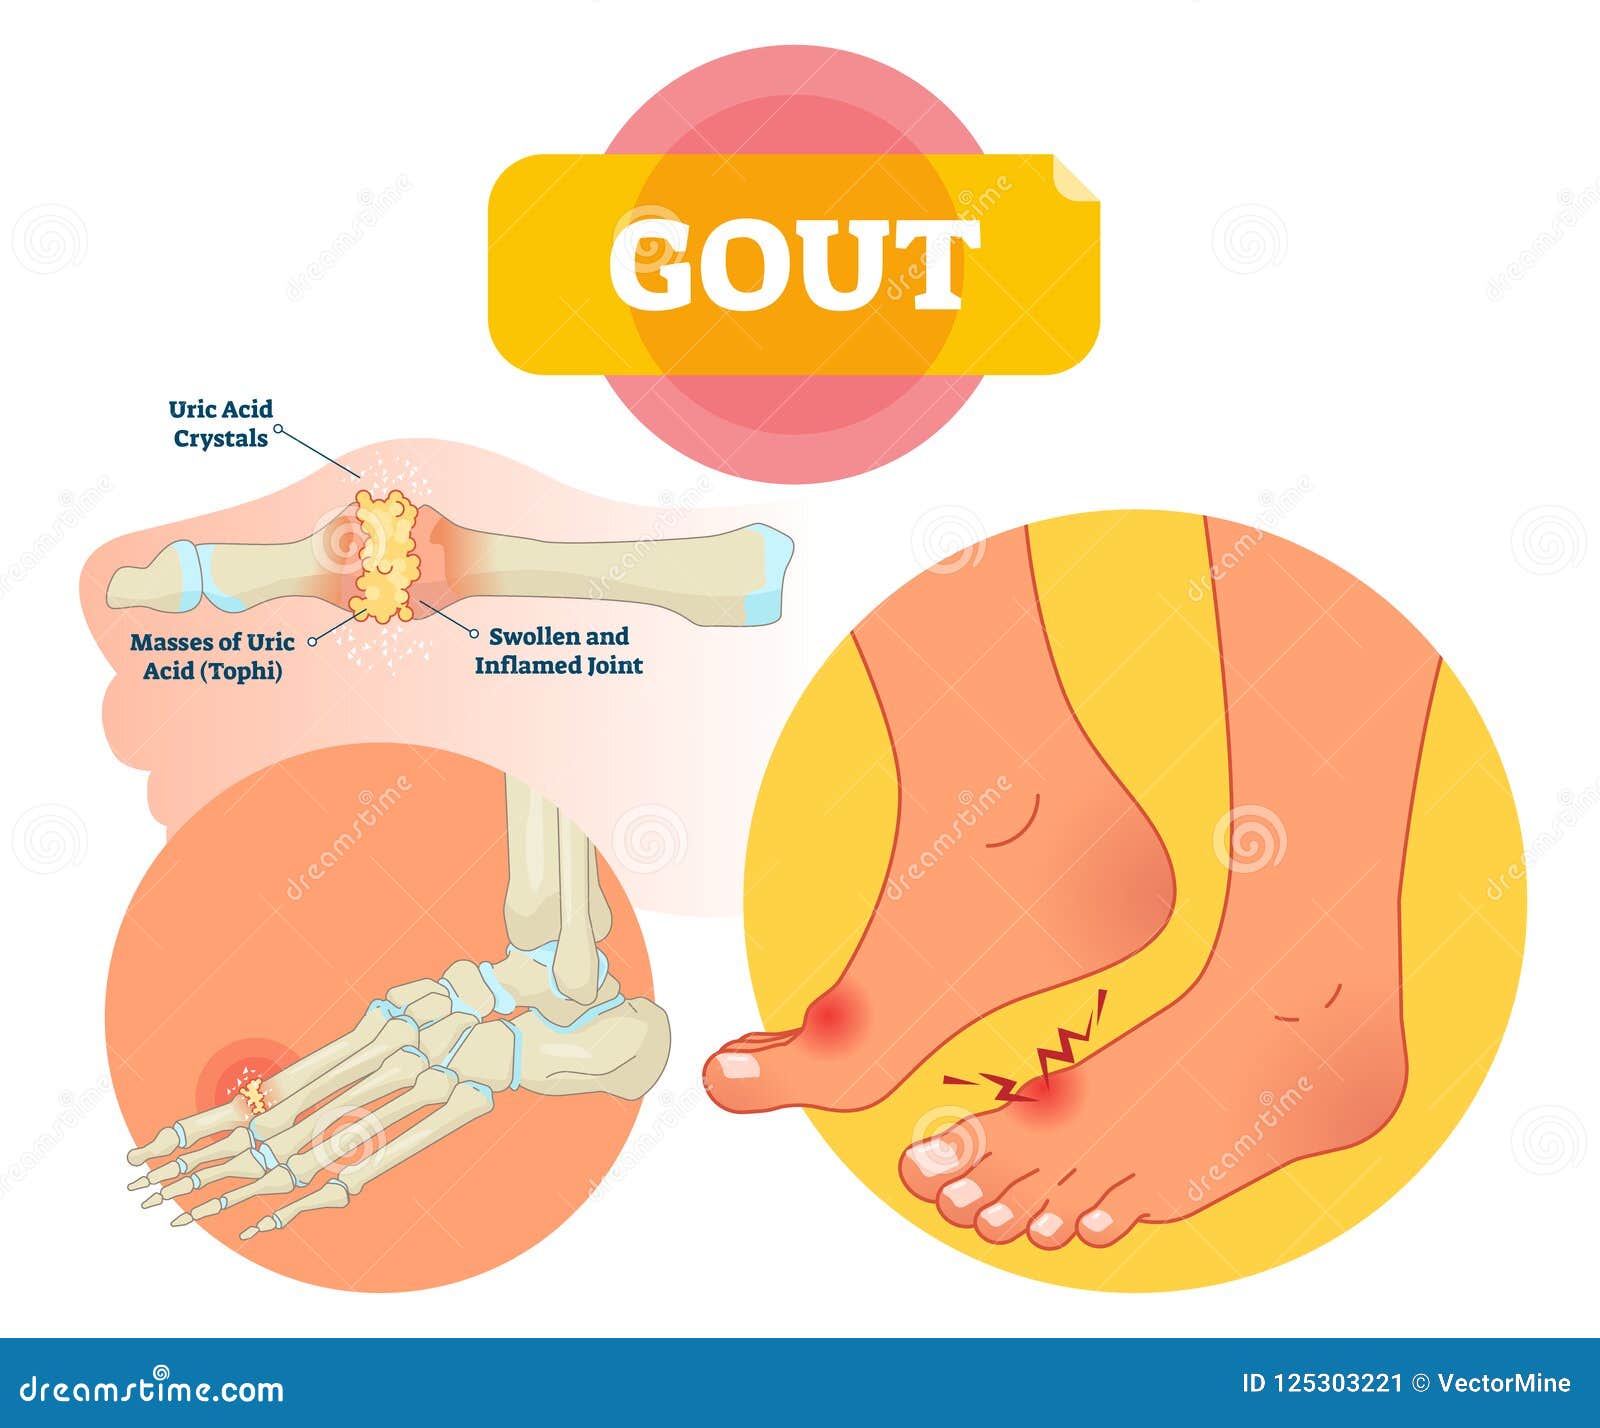 Gout Cartoons, Illustrations &amp; Vector Stock Images - 484 ...